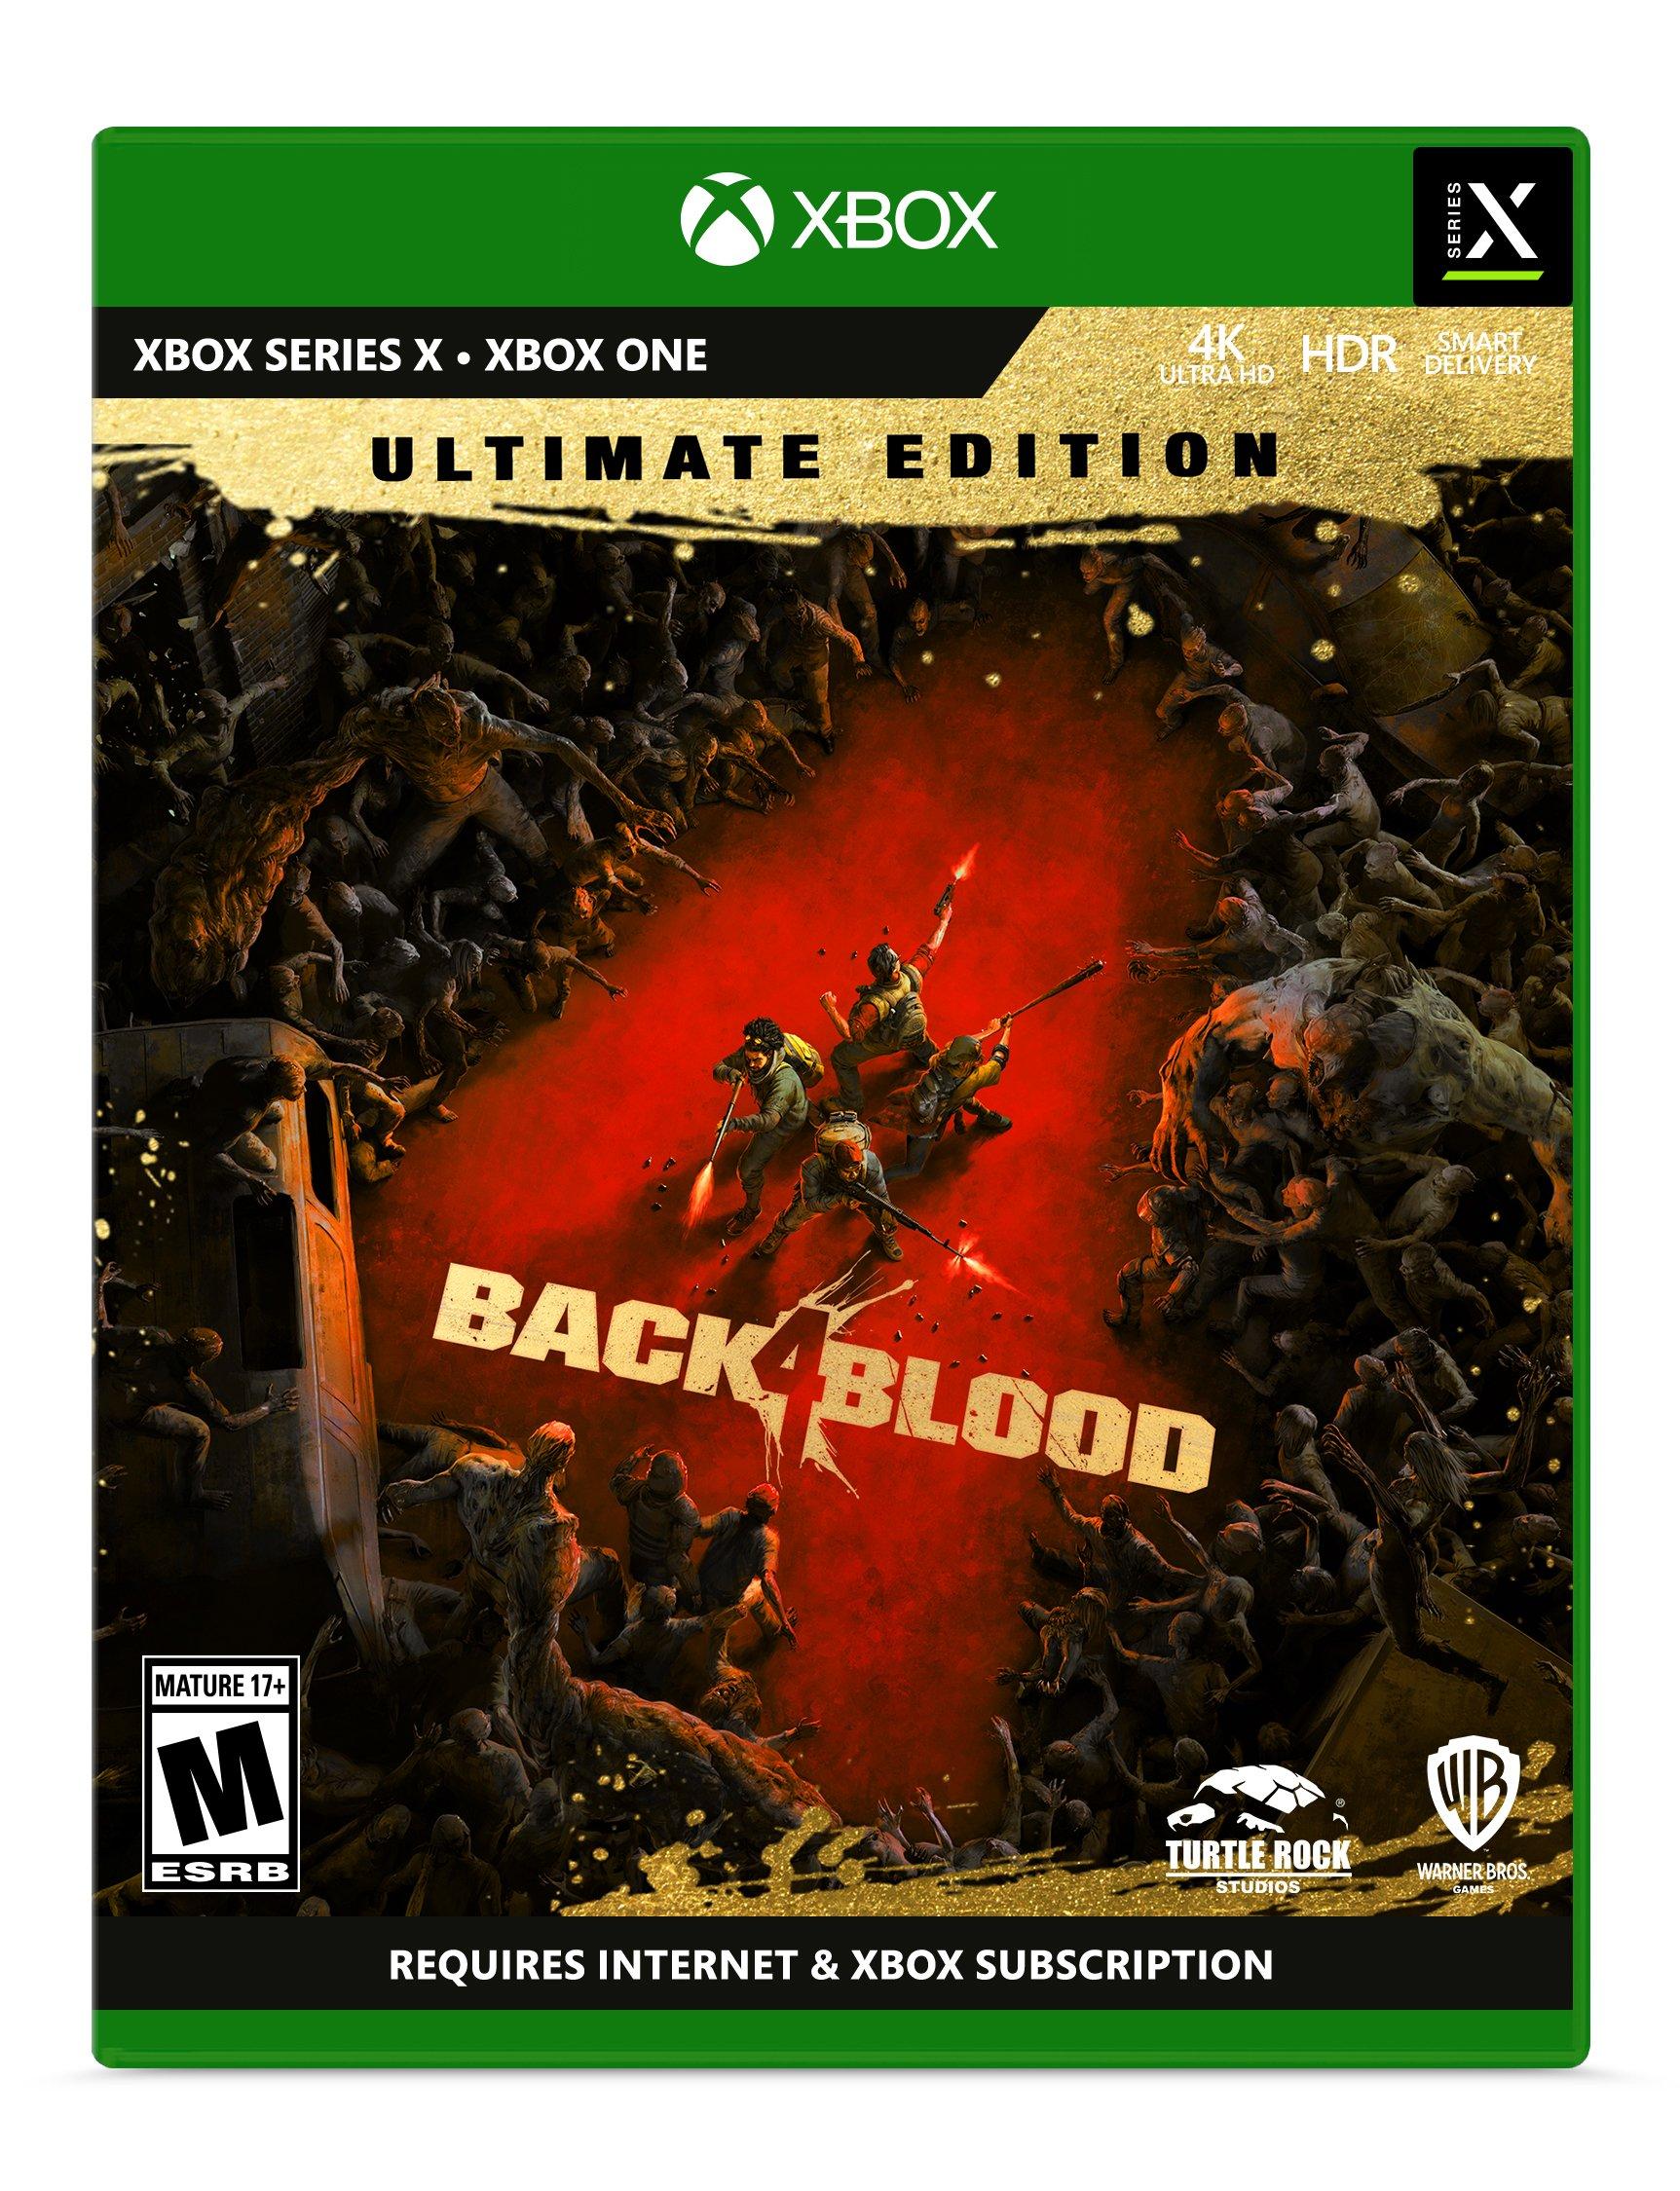 Back 4 Blood Heading To Xbox Game Pass